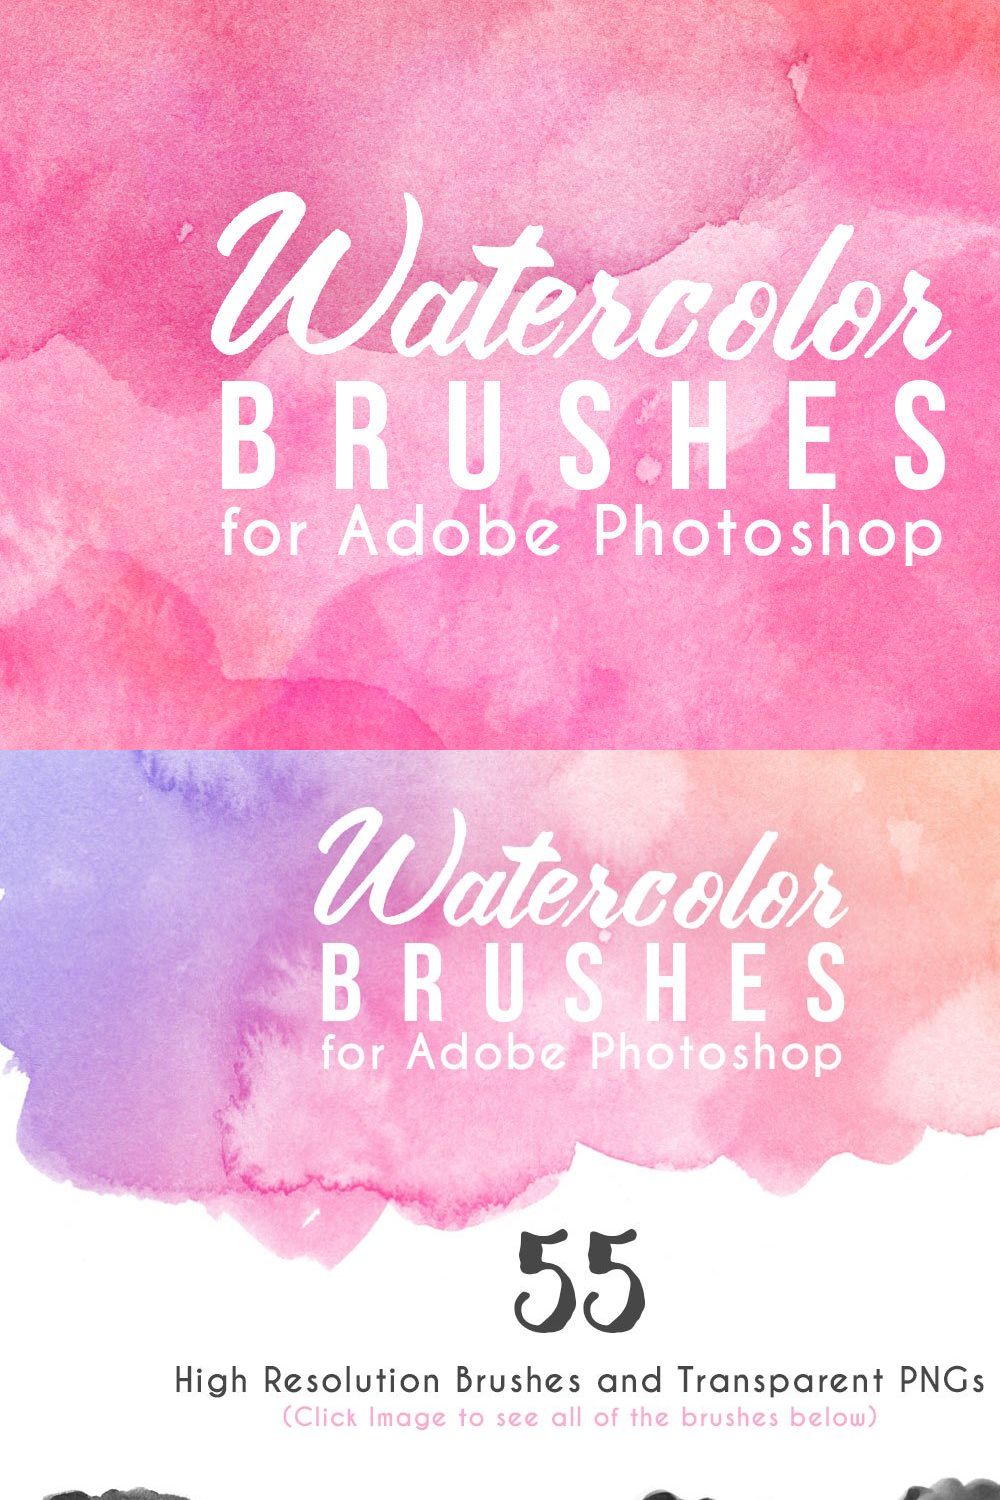 75 High Quality Watercolor Photoshop Brushes (Vol.2) – Tom Chalky